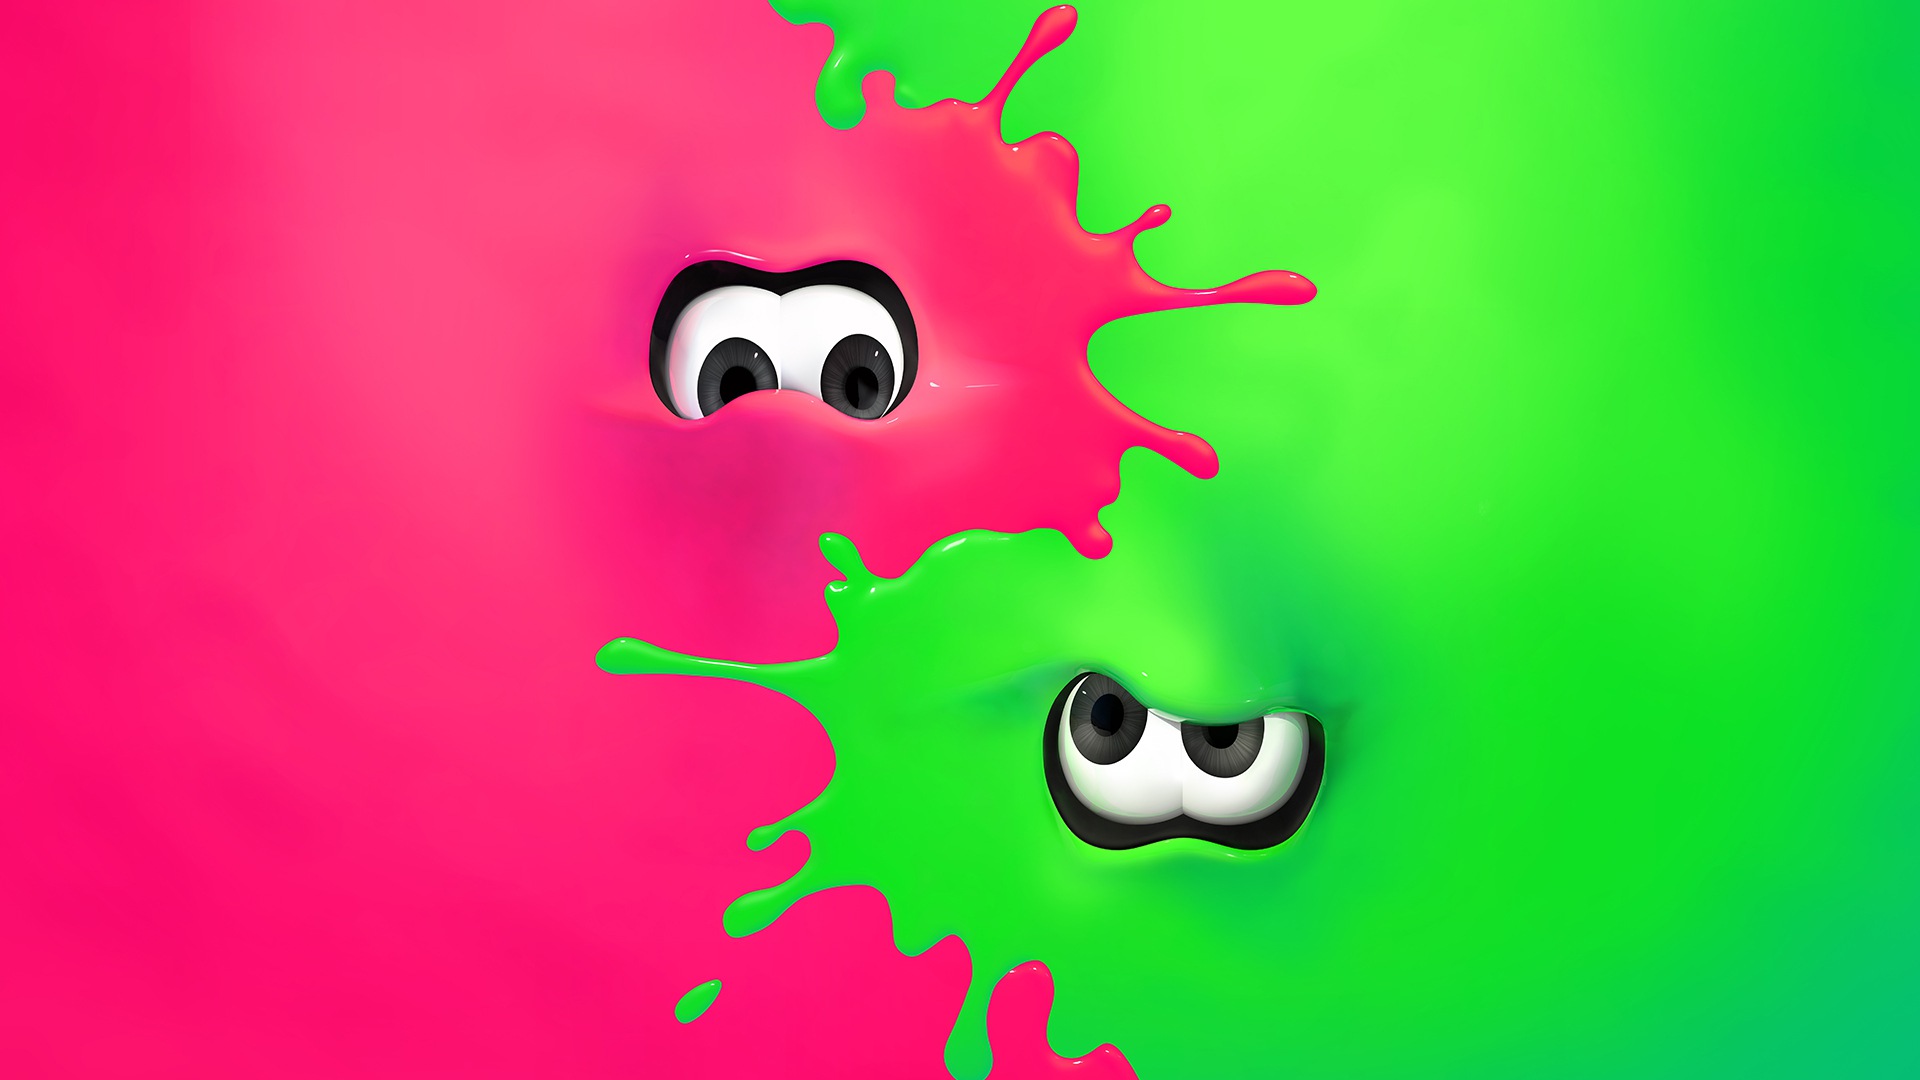 Kyle McLain on X A collection of Splatoon 3 wallpapers that you can only  get by checking in at 711 stores across Japan Enjoy  httpstcoEUTW3eCUsV  X